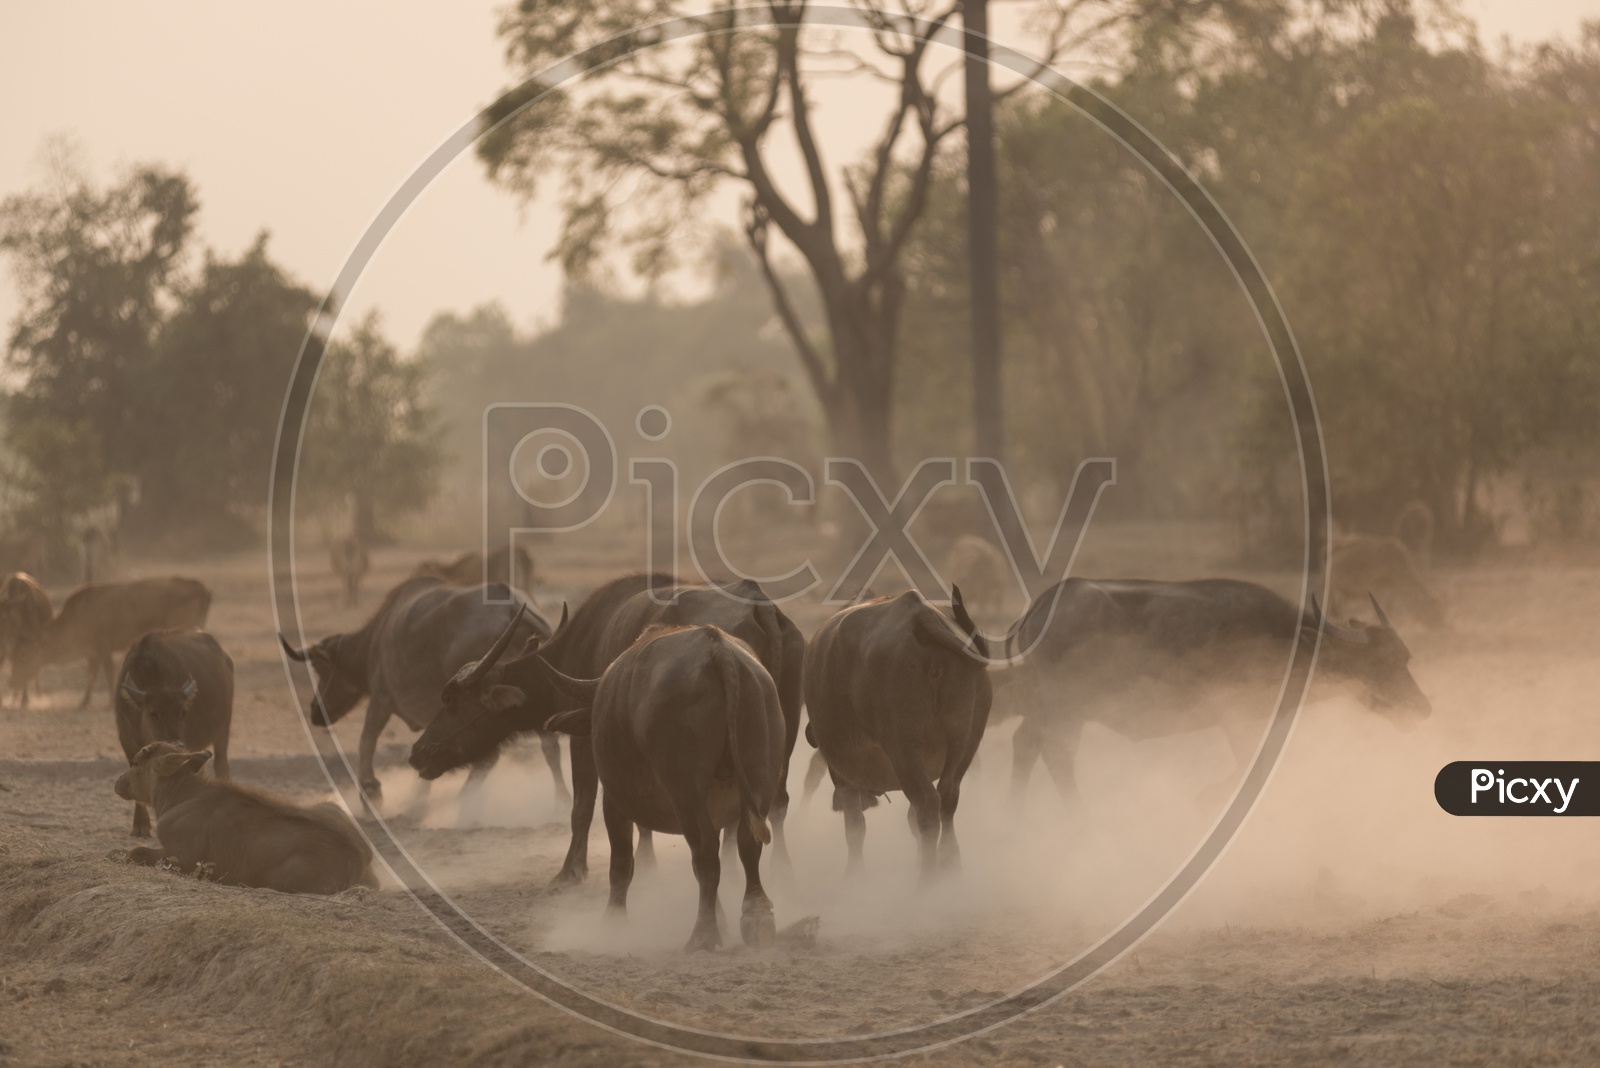 Buffaloes in the Paddy fields of a village in Thailand